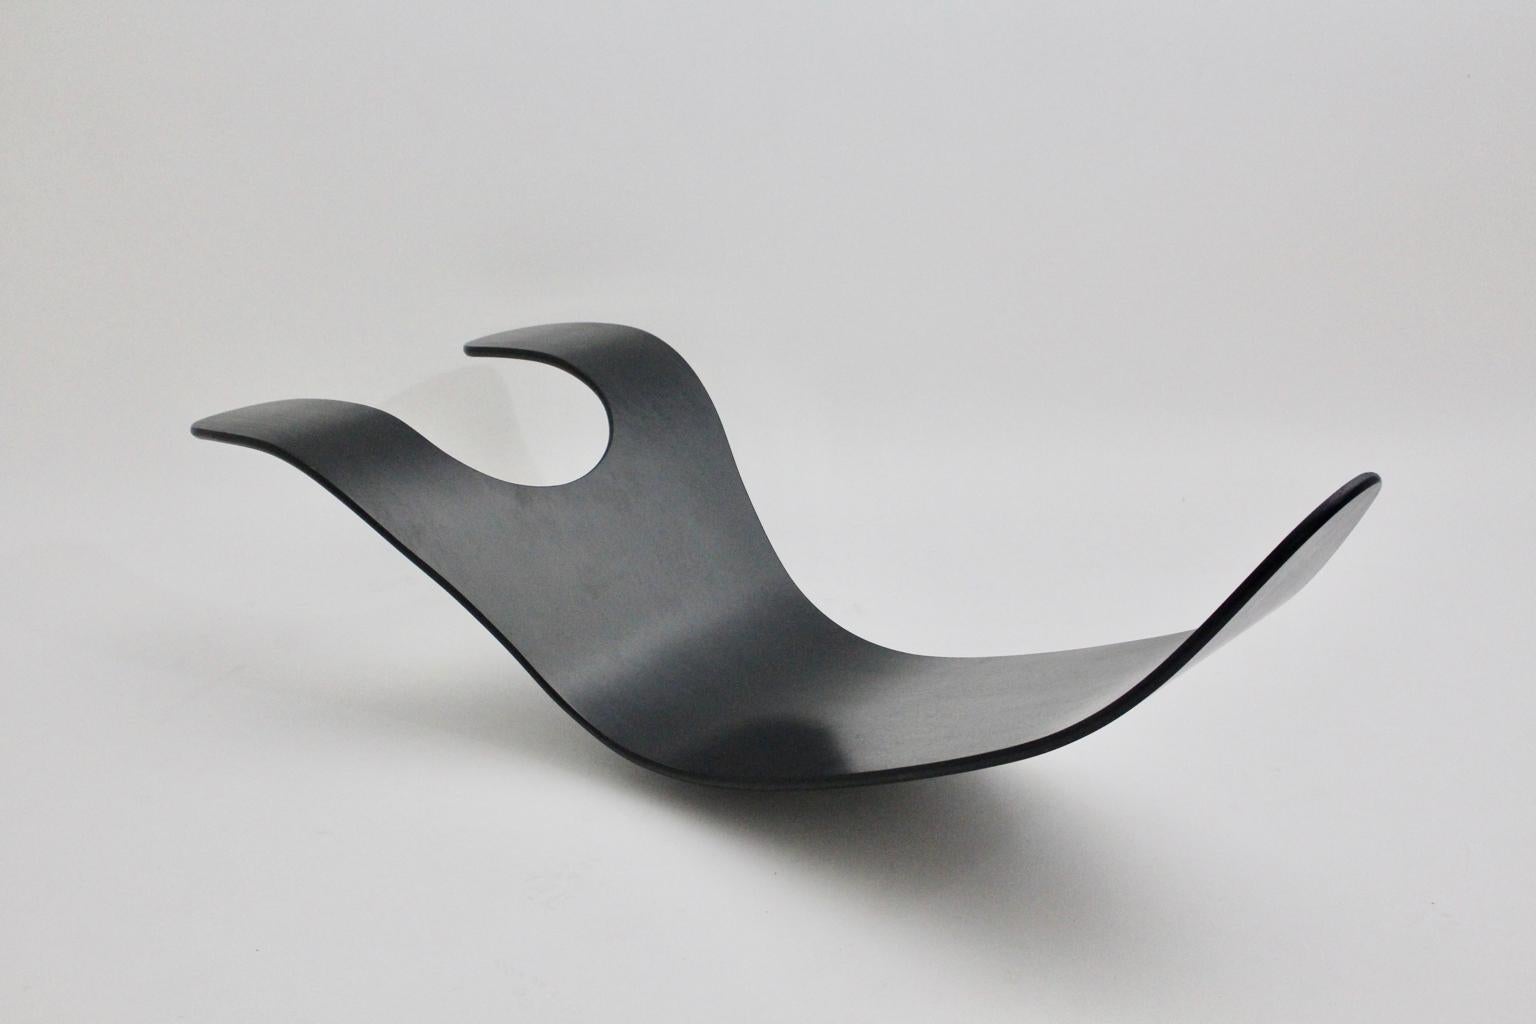 Scandinavian Modern black rocking chair or lounge chair model Chip designed by Teppo Asikainen & Ikka Terho 1995 in Finland and executed by snowcrash ( founded 1998 in Helsinki, Finland ).
The lounge chair 